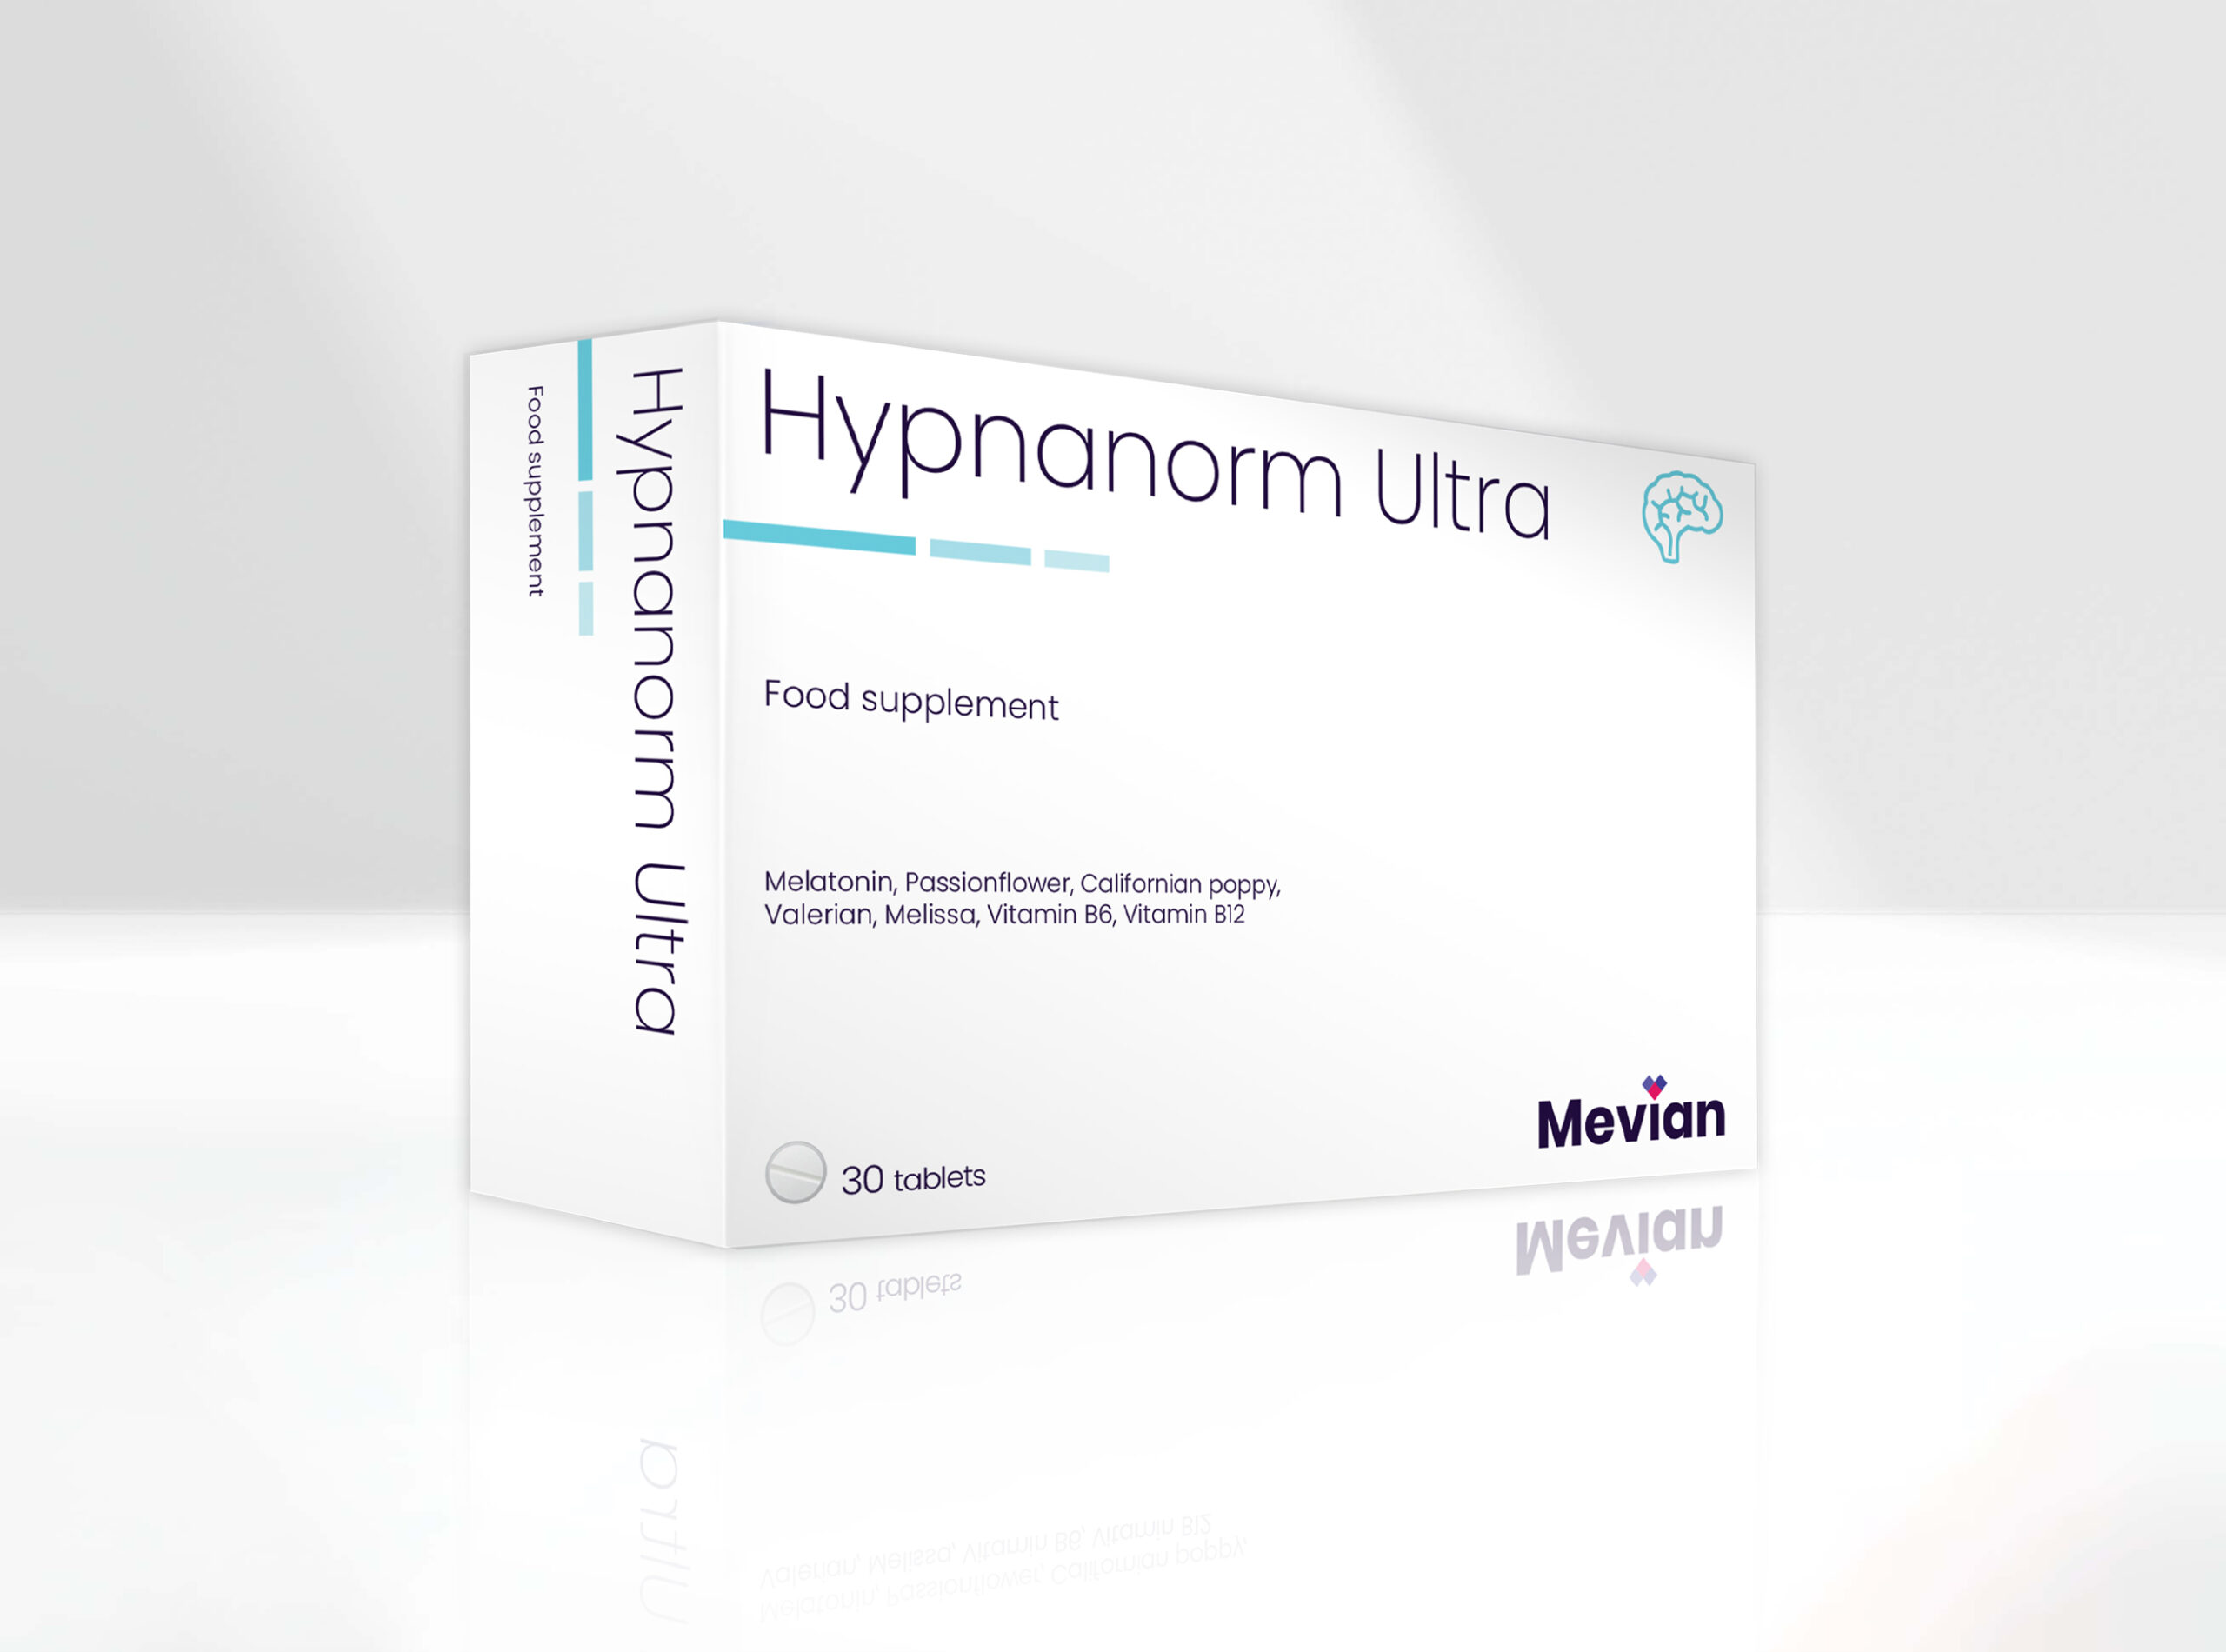 Hypnanorm Ultra is ideal for stimulating relaxation and mitigating mild sleep disorders and jetlag effects.